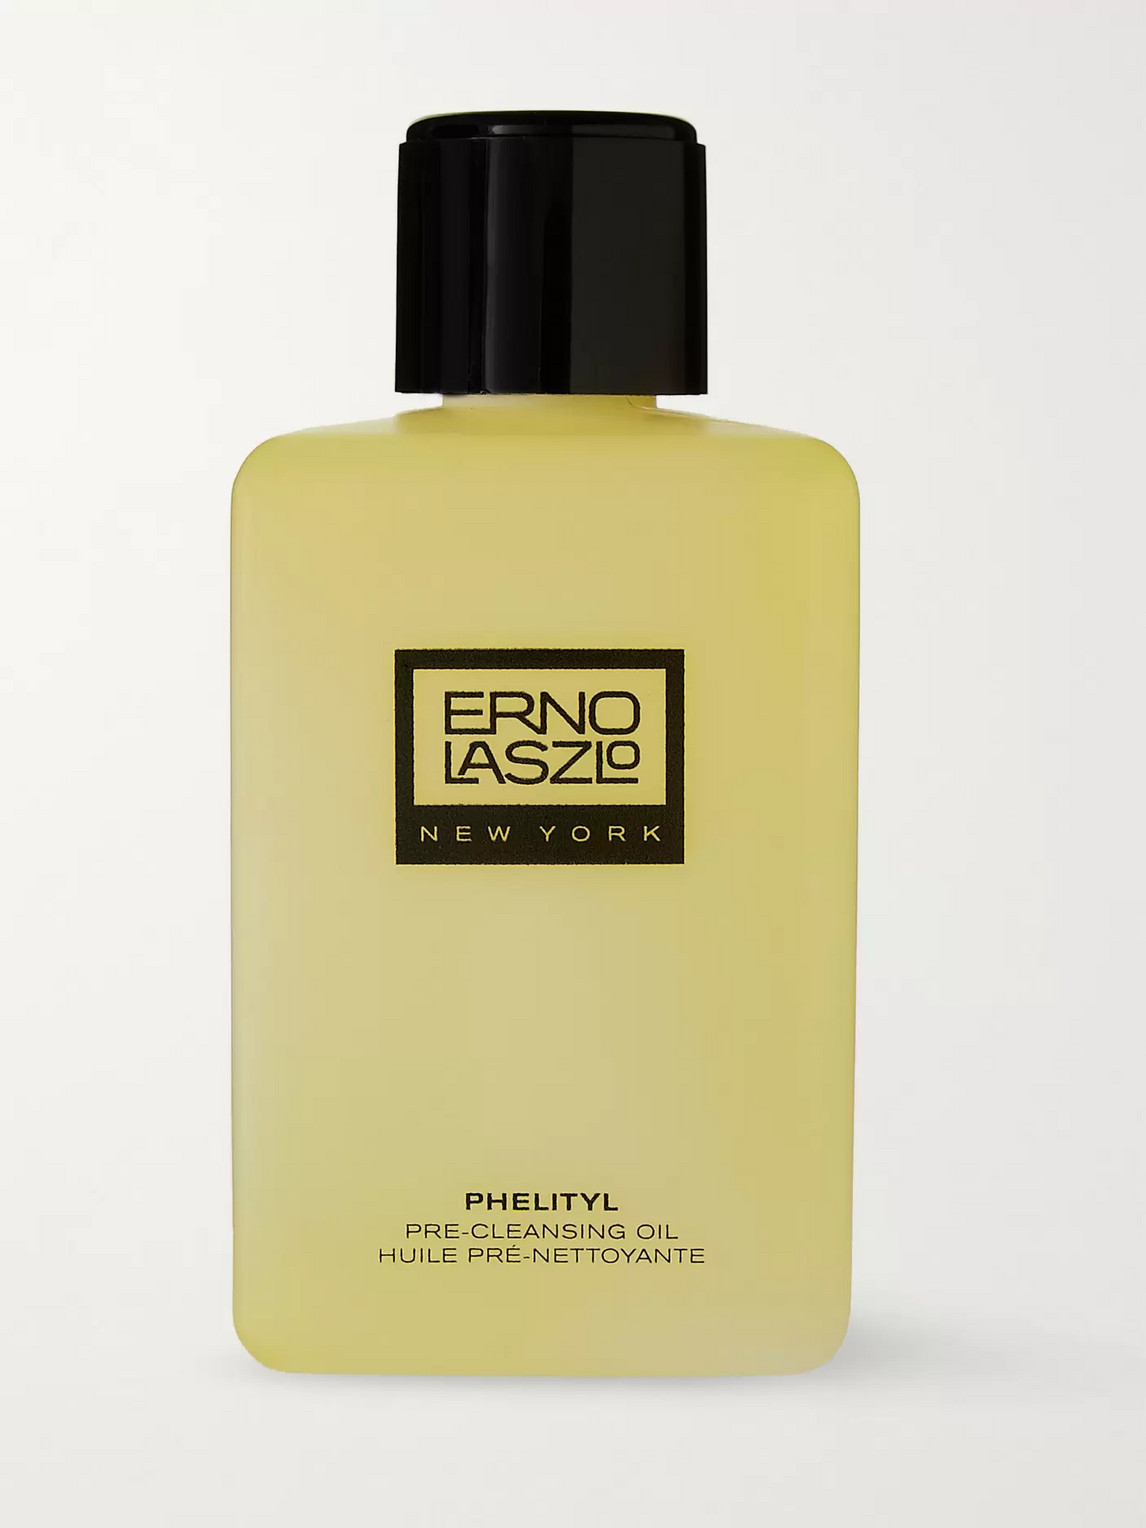 Erno Laszlo Phelityl Pre-cleansing Oil, 201ml In Colorless